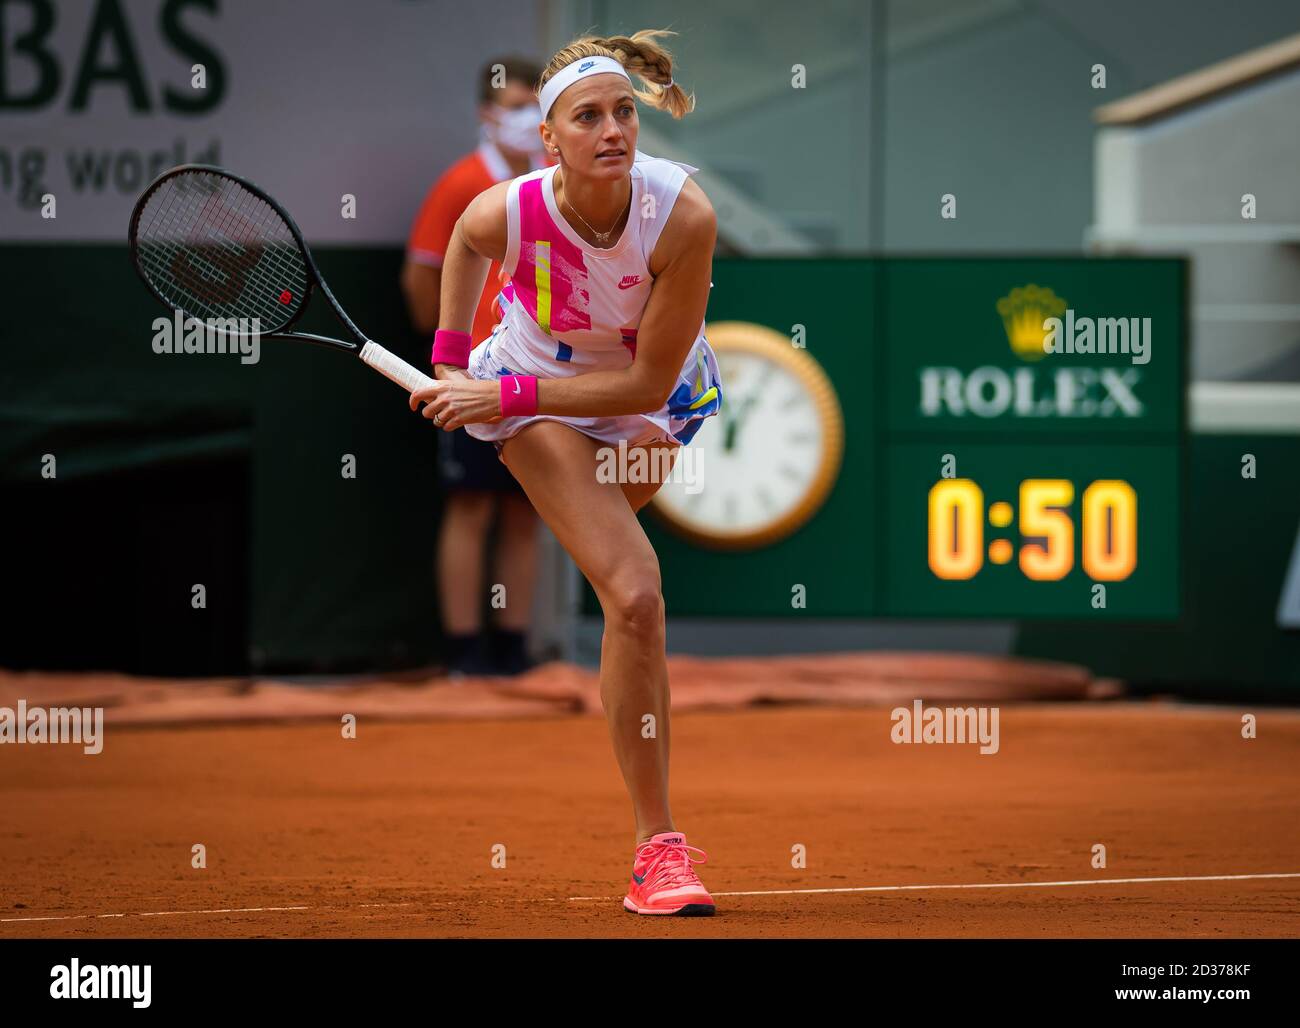 Paris, France, Italy. 07th Oct, 2020. Petra Kvitova of the Czech Republic in action against Laura Siegemund of Germany during her quarter-final match at the Roland Garros 2020, Grand Slam tennis tournament, on October 7, 2020 at Roland Garros stadium in Paris, France - Photo Rob Prange/Spain DPPI/DPPI during Quarter-final of the Roland Garros 2020, Grand Slam, Tennis Internationals in paris, france, Italy, October 07 2020 Credit: Independent Photo Agency/Alamy Live News Stock Photo